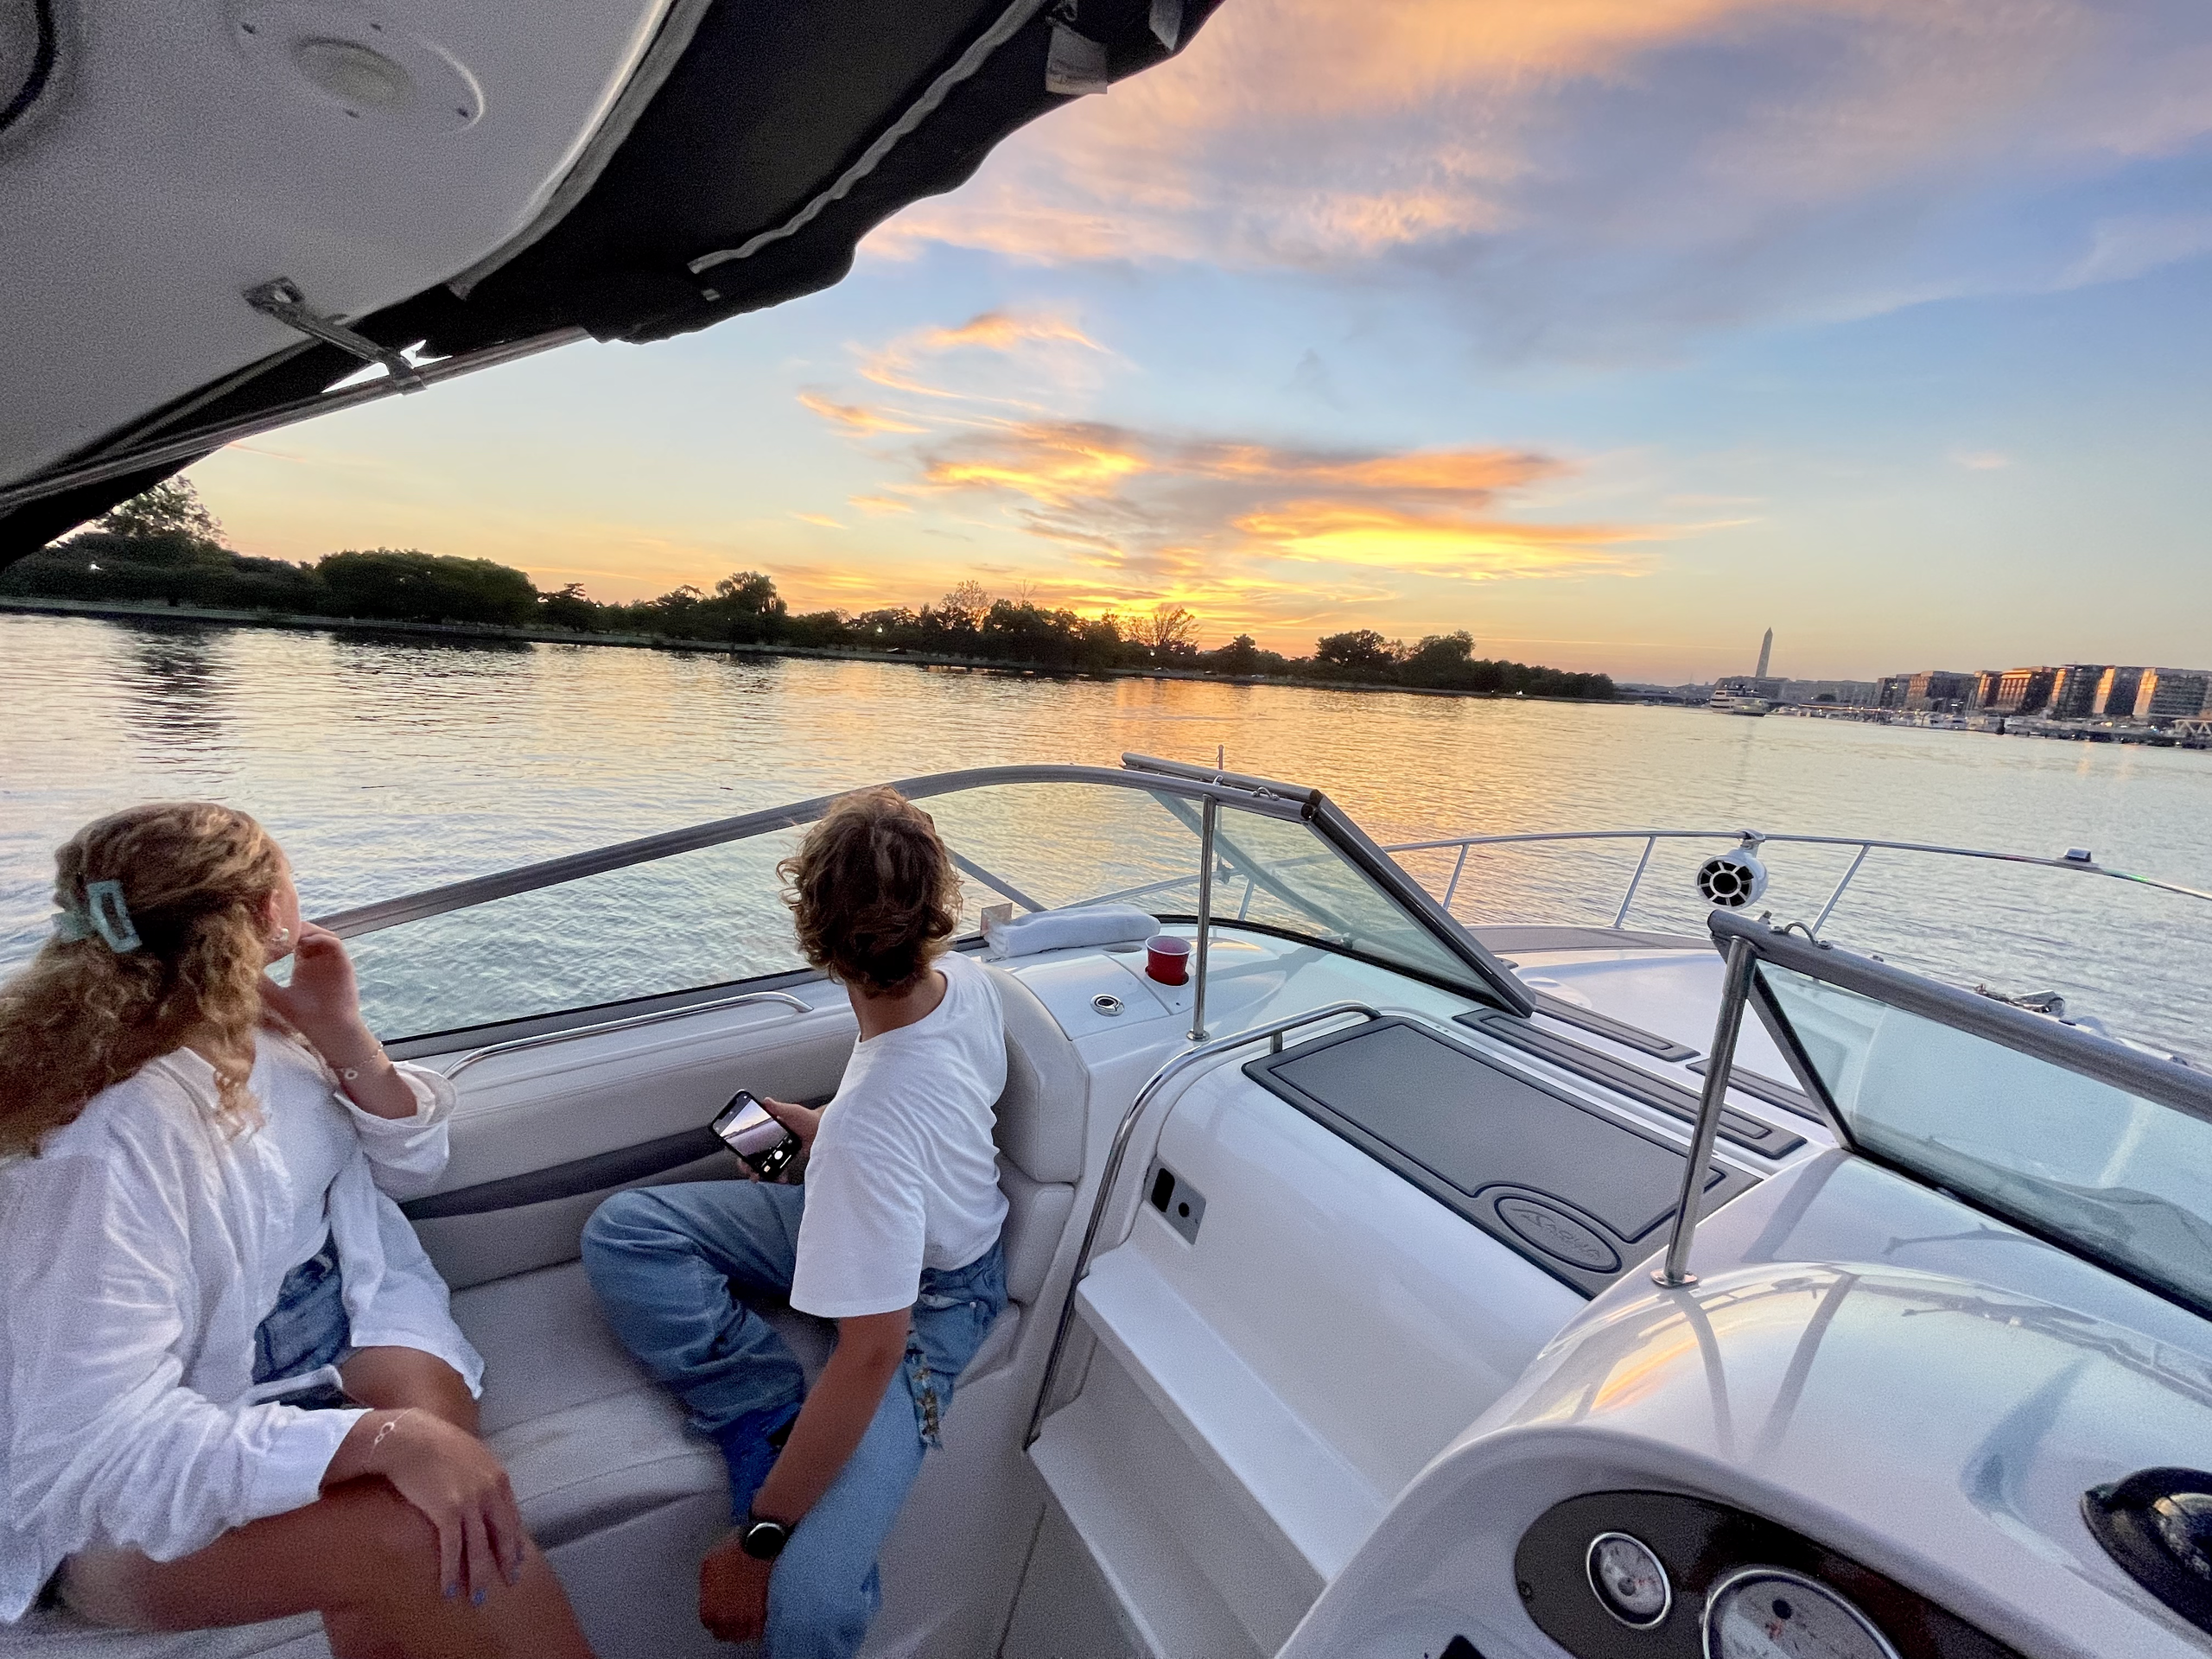 Private BYOB CamJoy Yacht Charter from the Georgetown Waterfront (Up to 6 Passengers) image 2